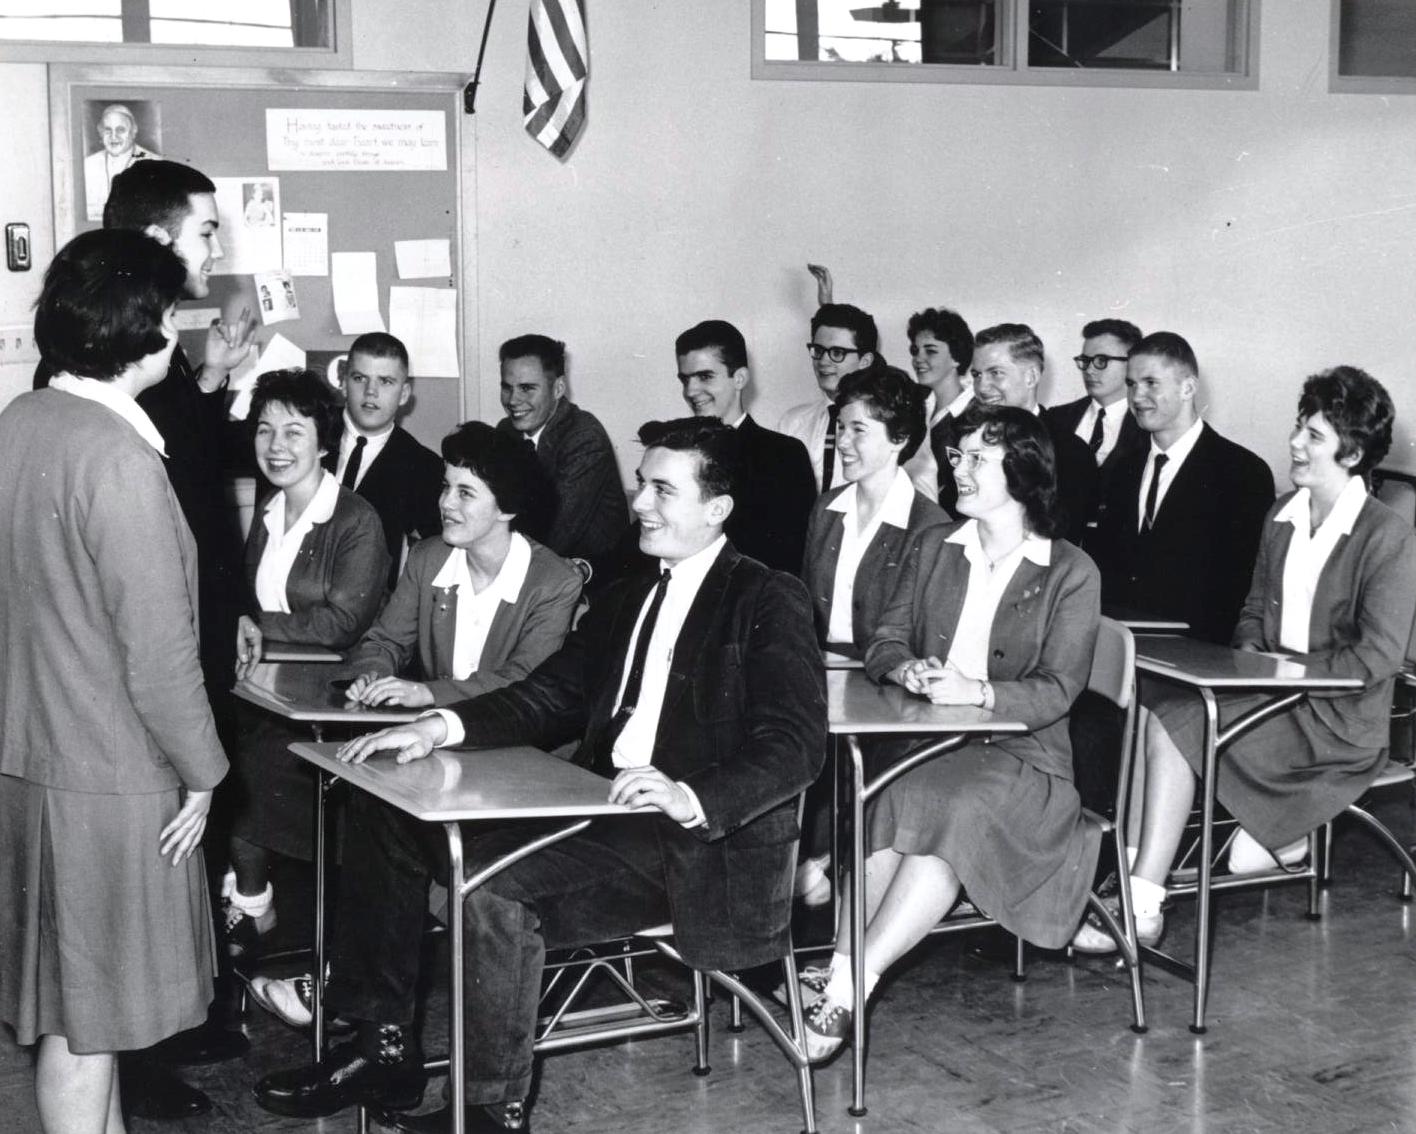 Students at Blanchet High School in classroom. VR1040.0099